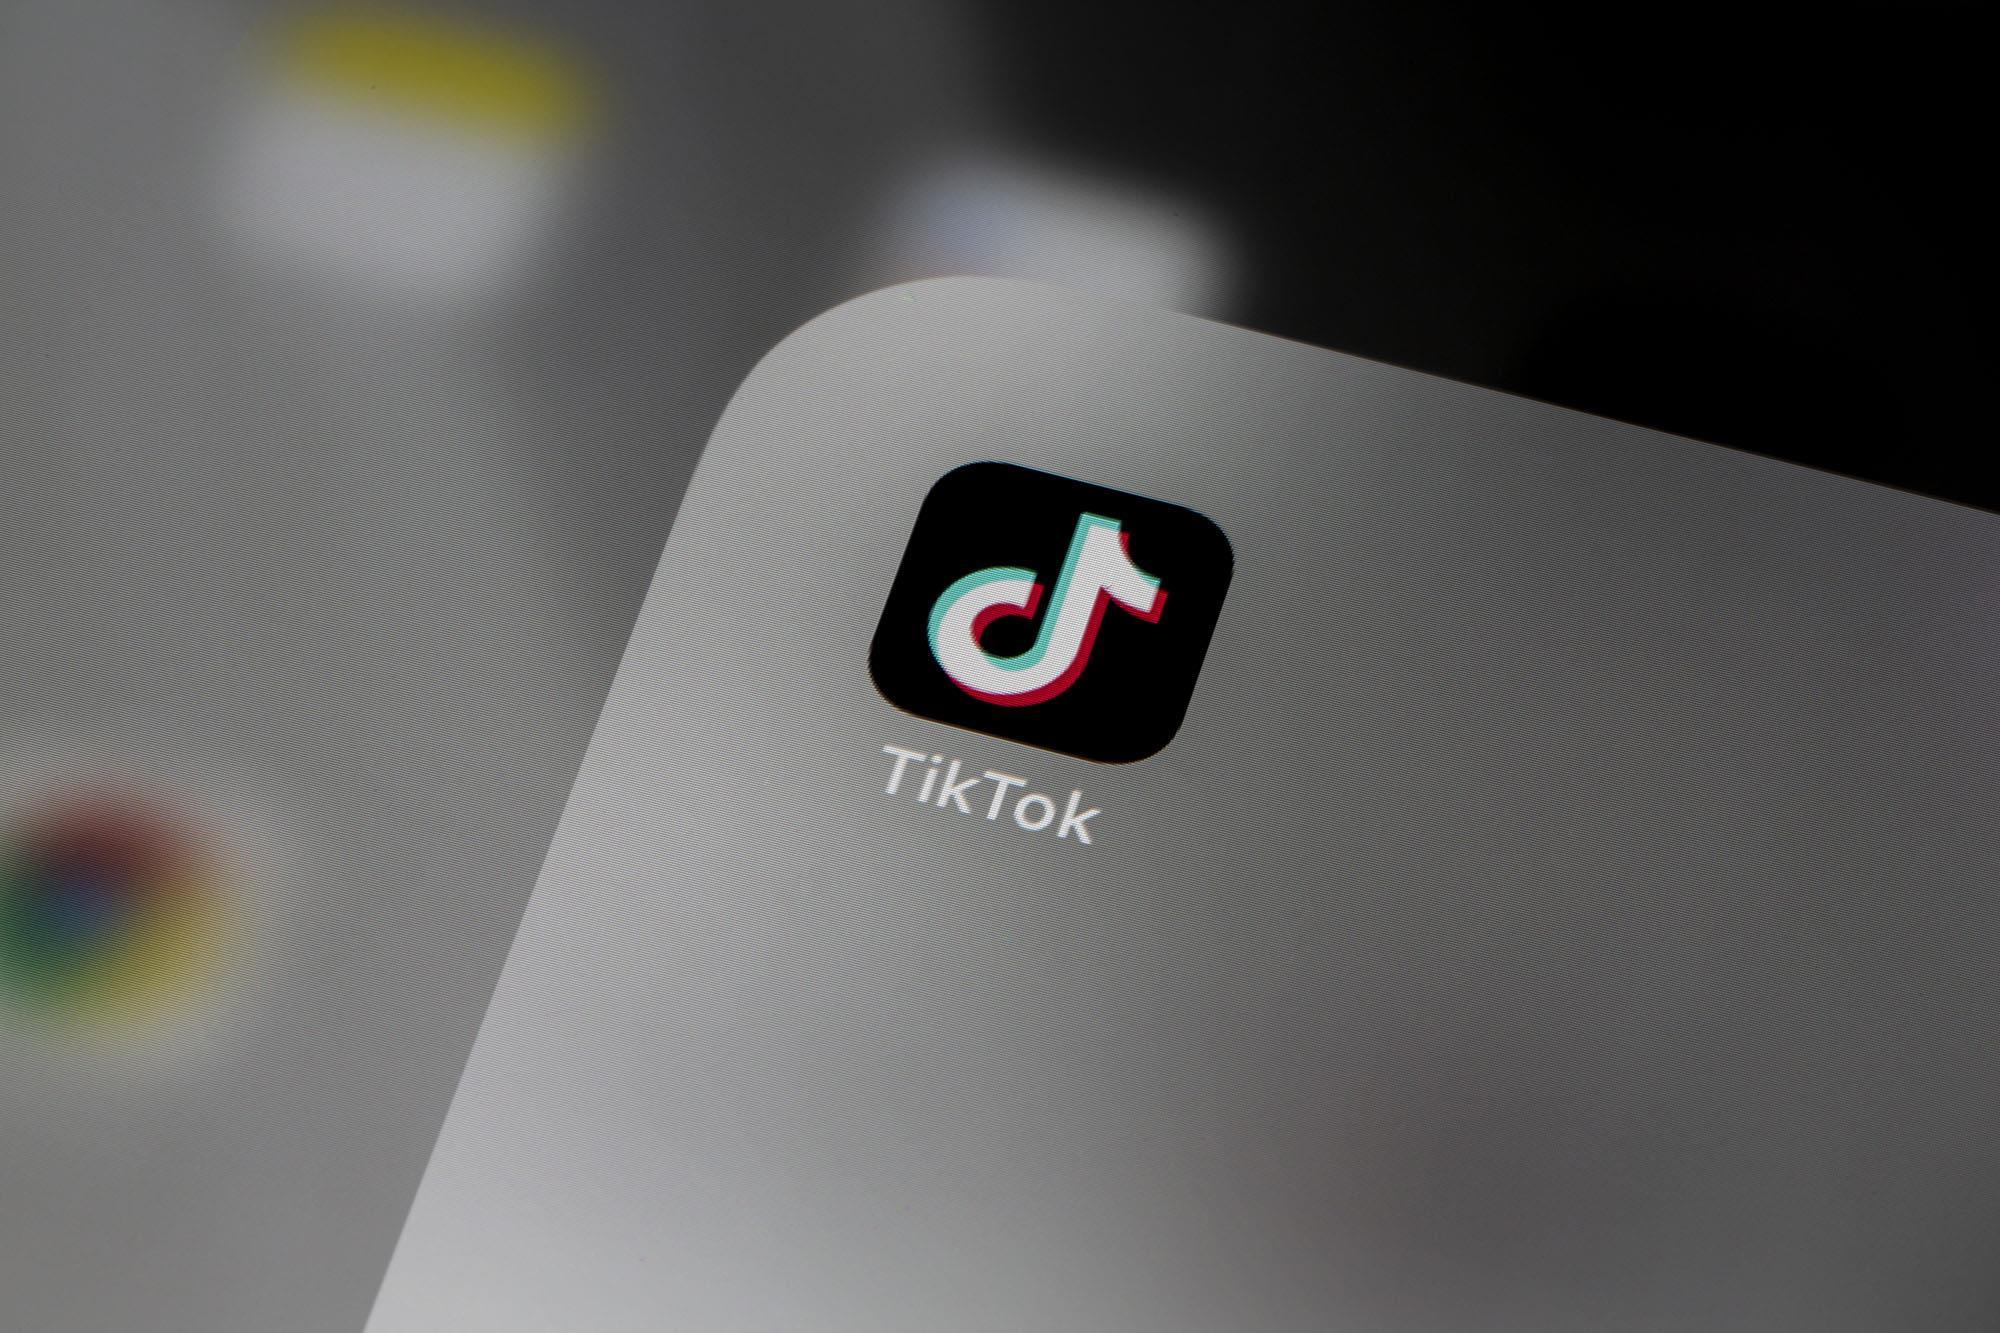 TikTok Fines ‘A Potentially Fruitful Alternative’ to Bans or Lack of Regulation